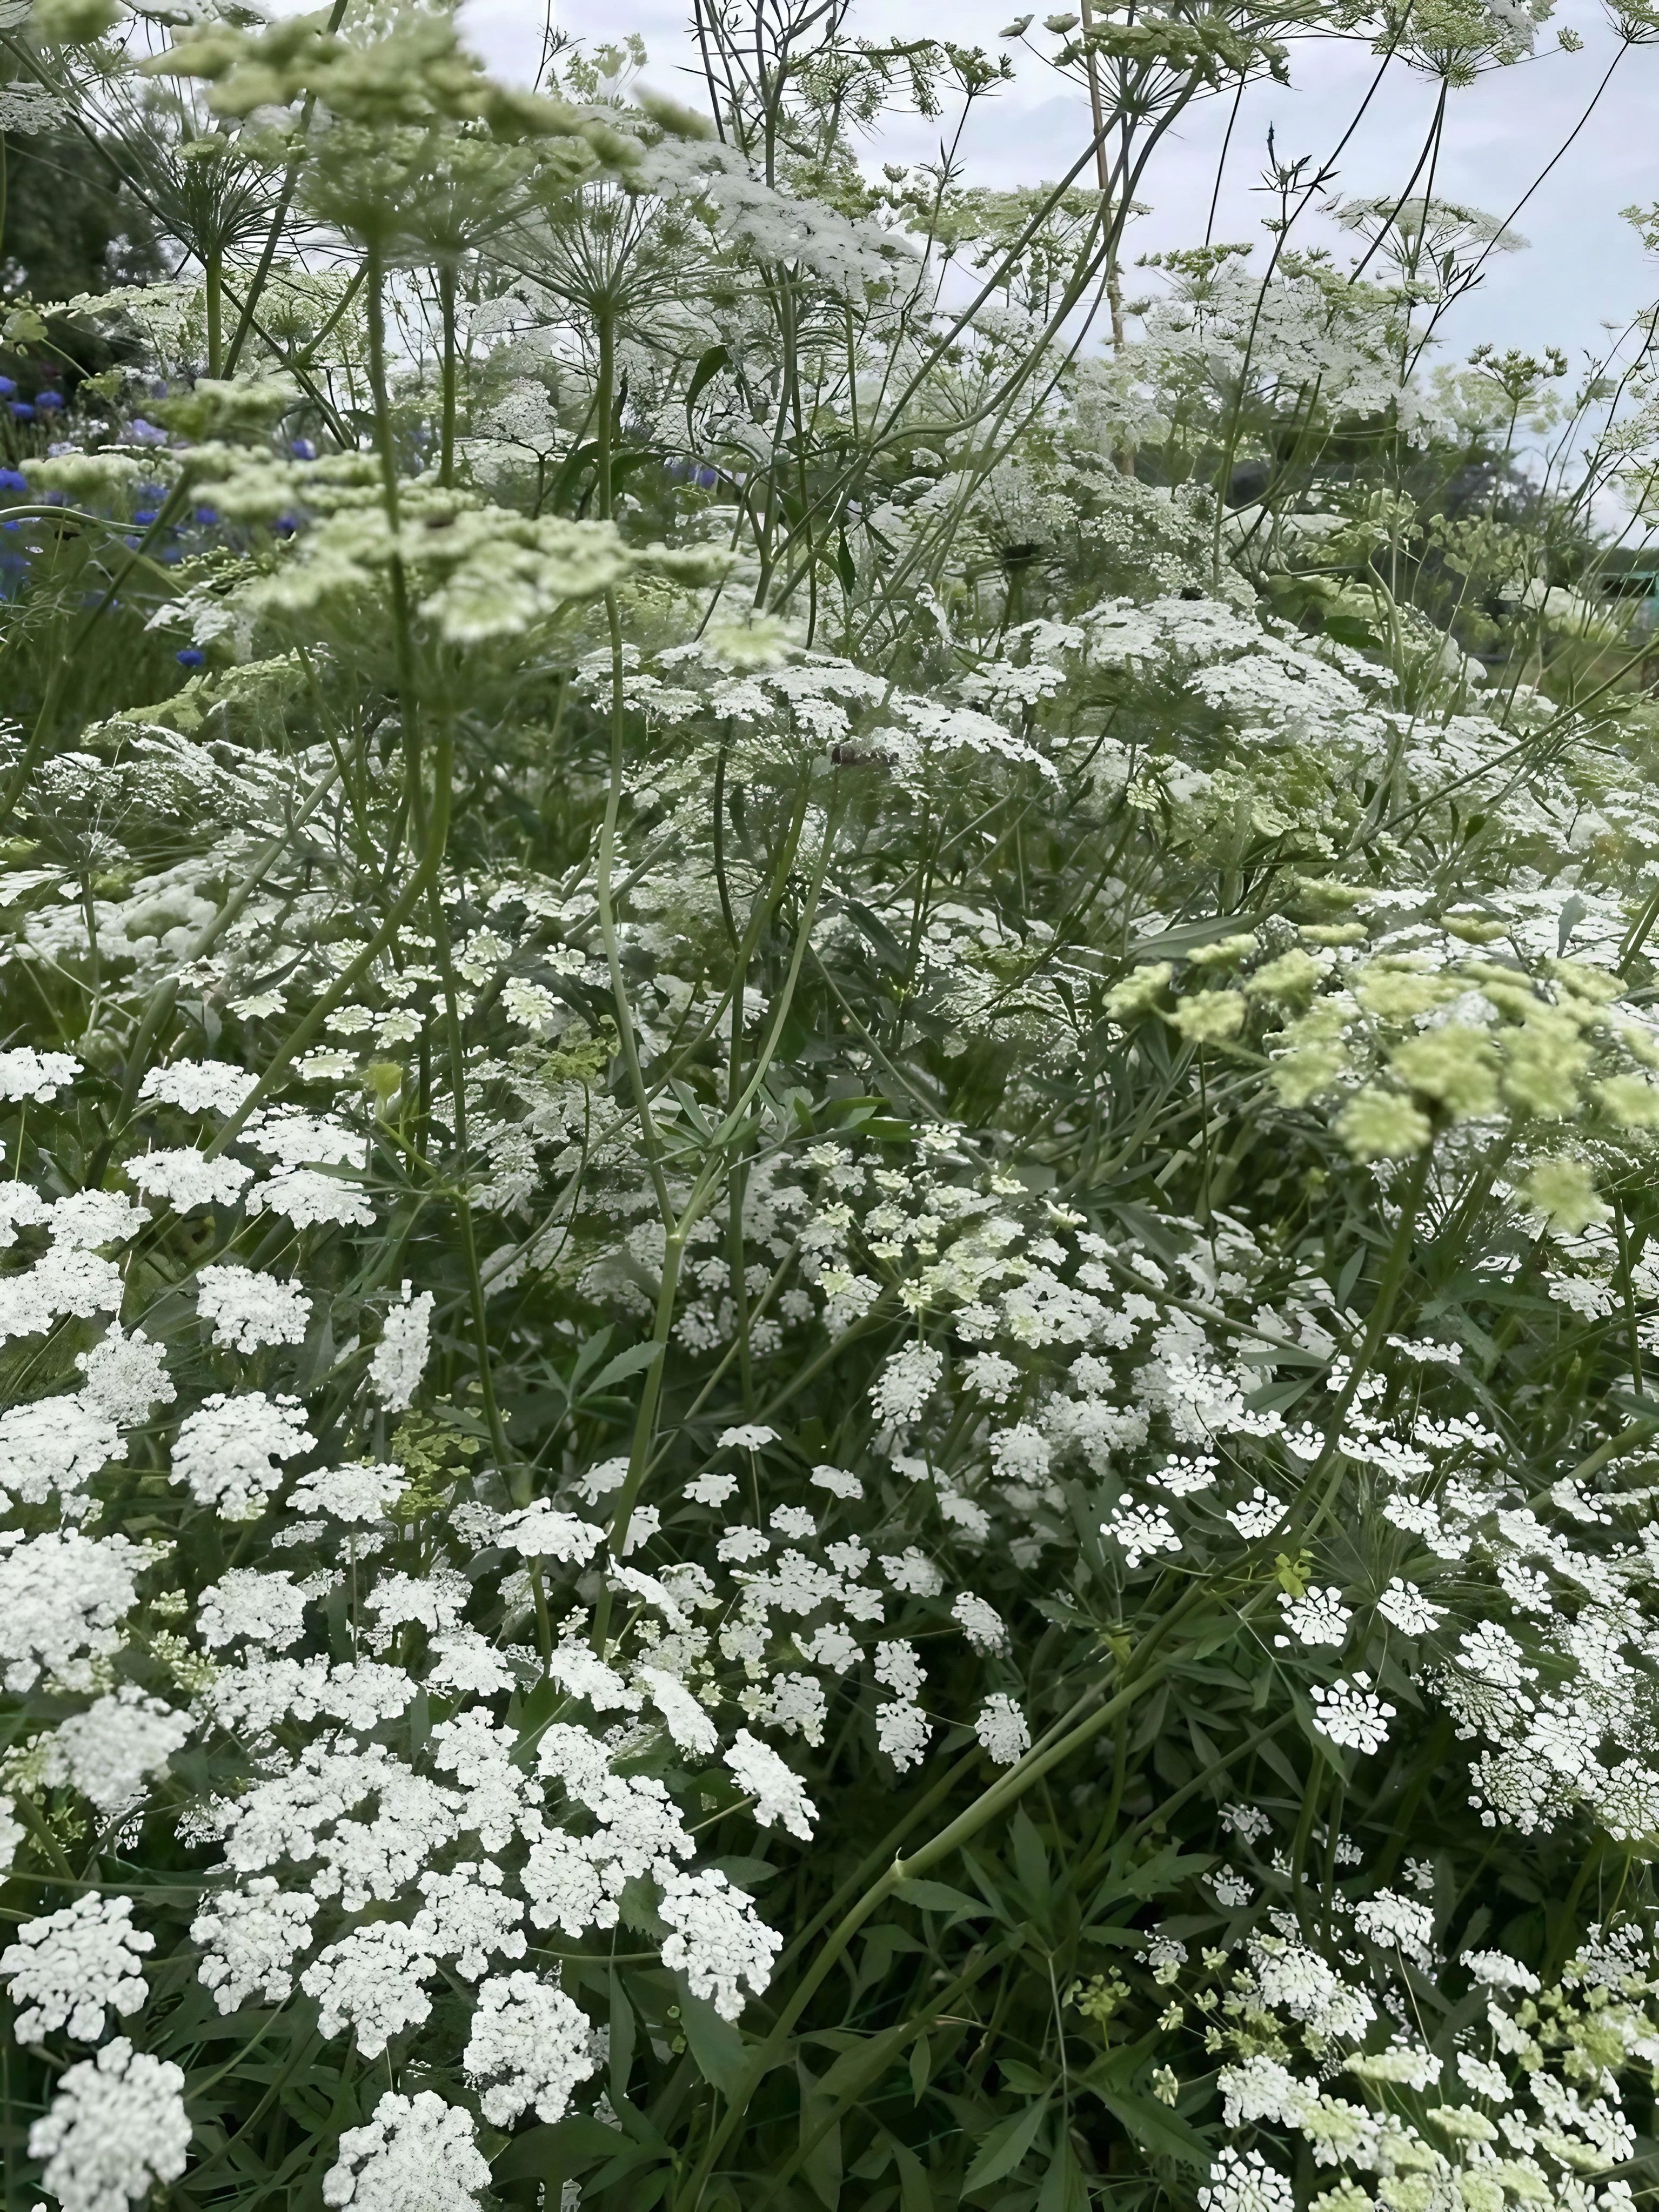 Field covered with the white blooms of Ammi Majus plants